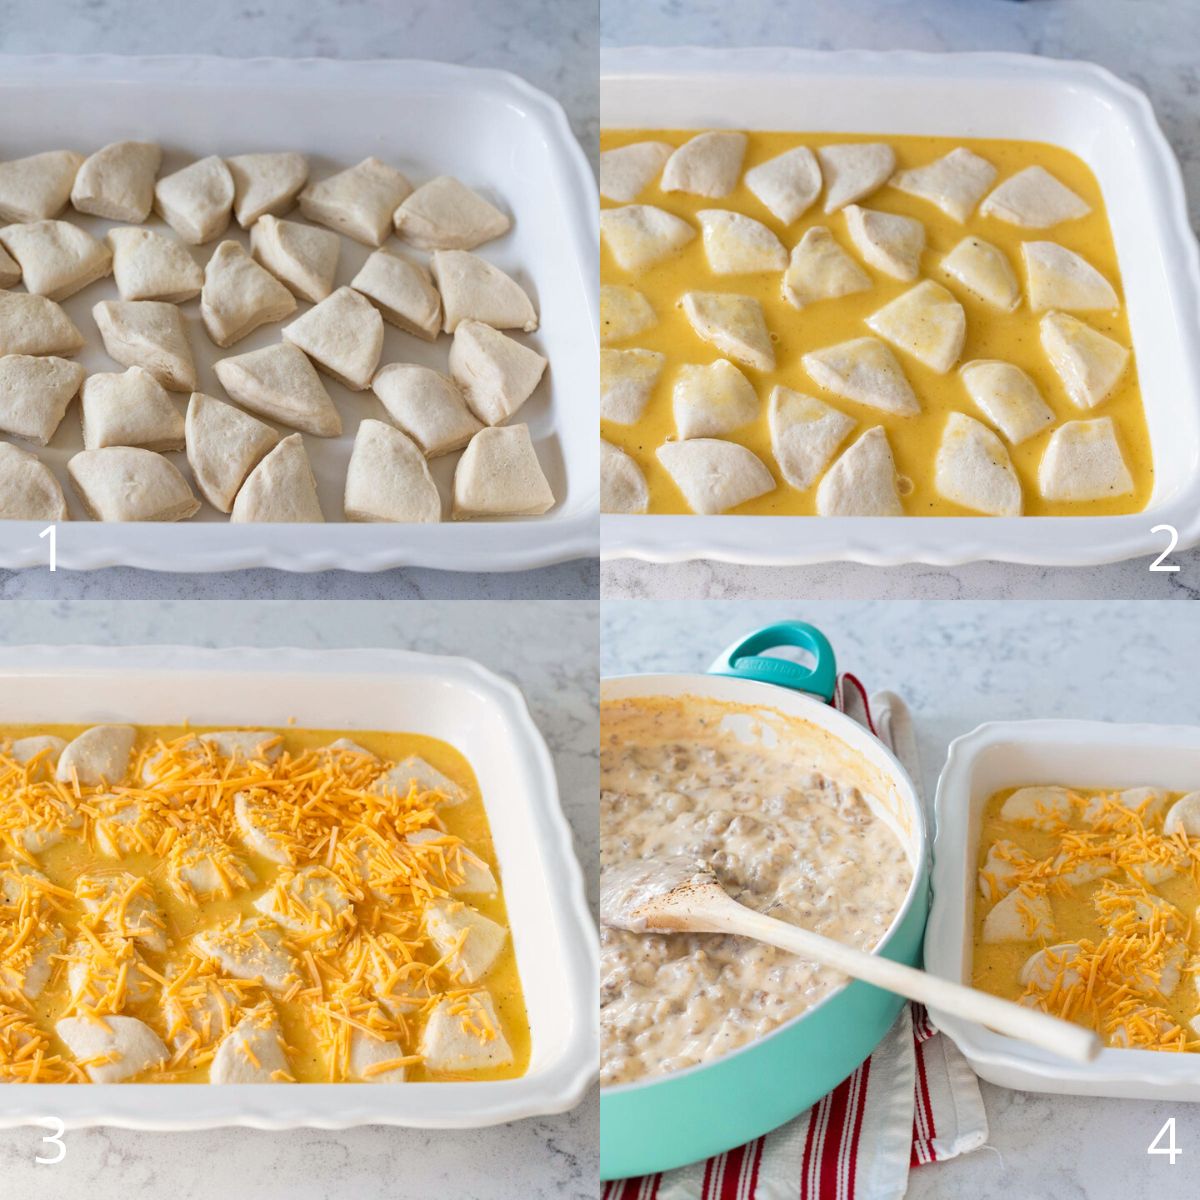 The step by step photos show how to assemble the sausage gravy casserole.